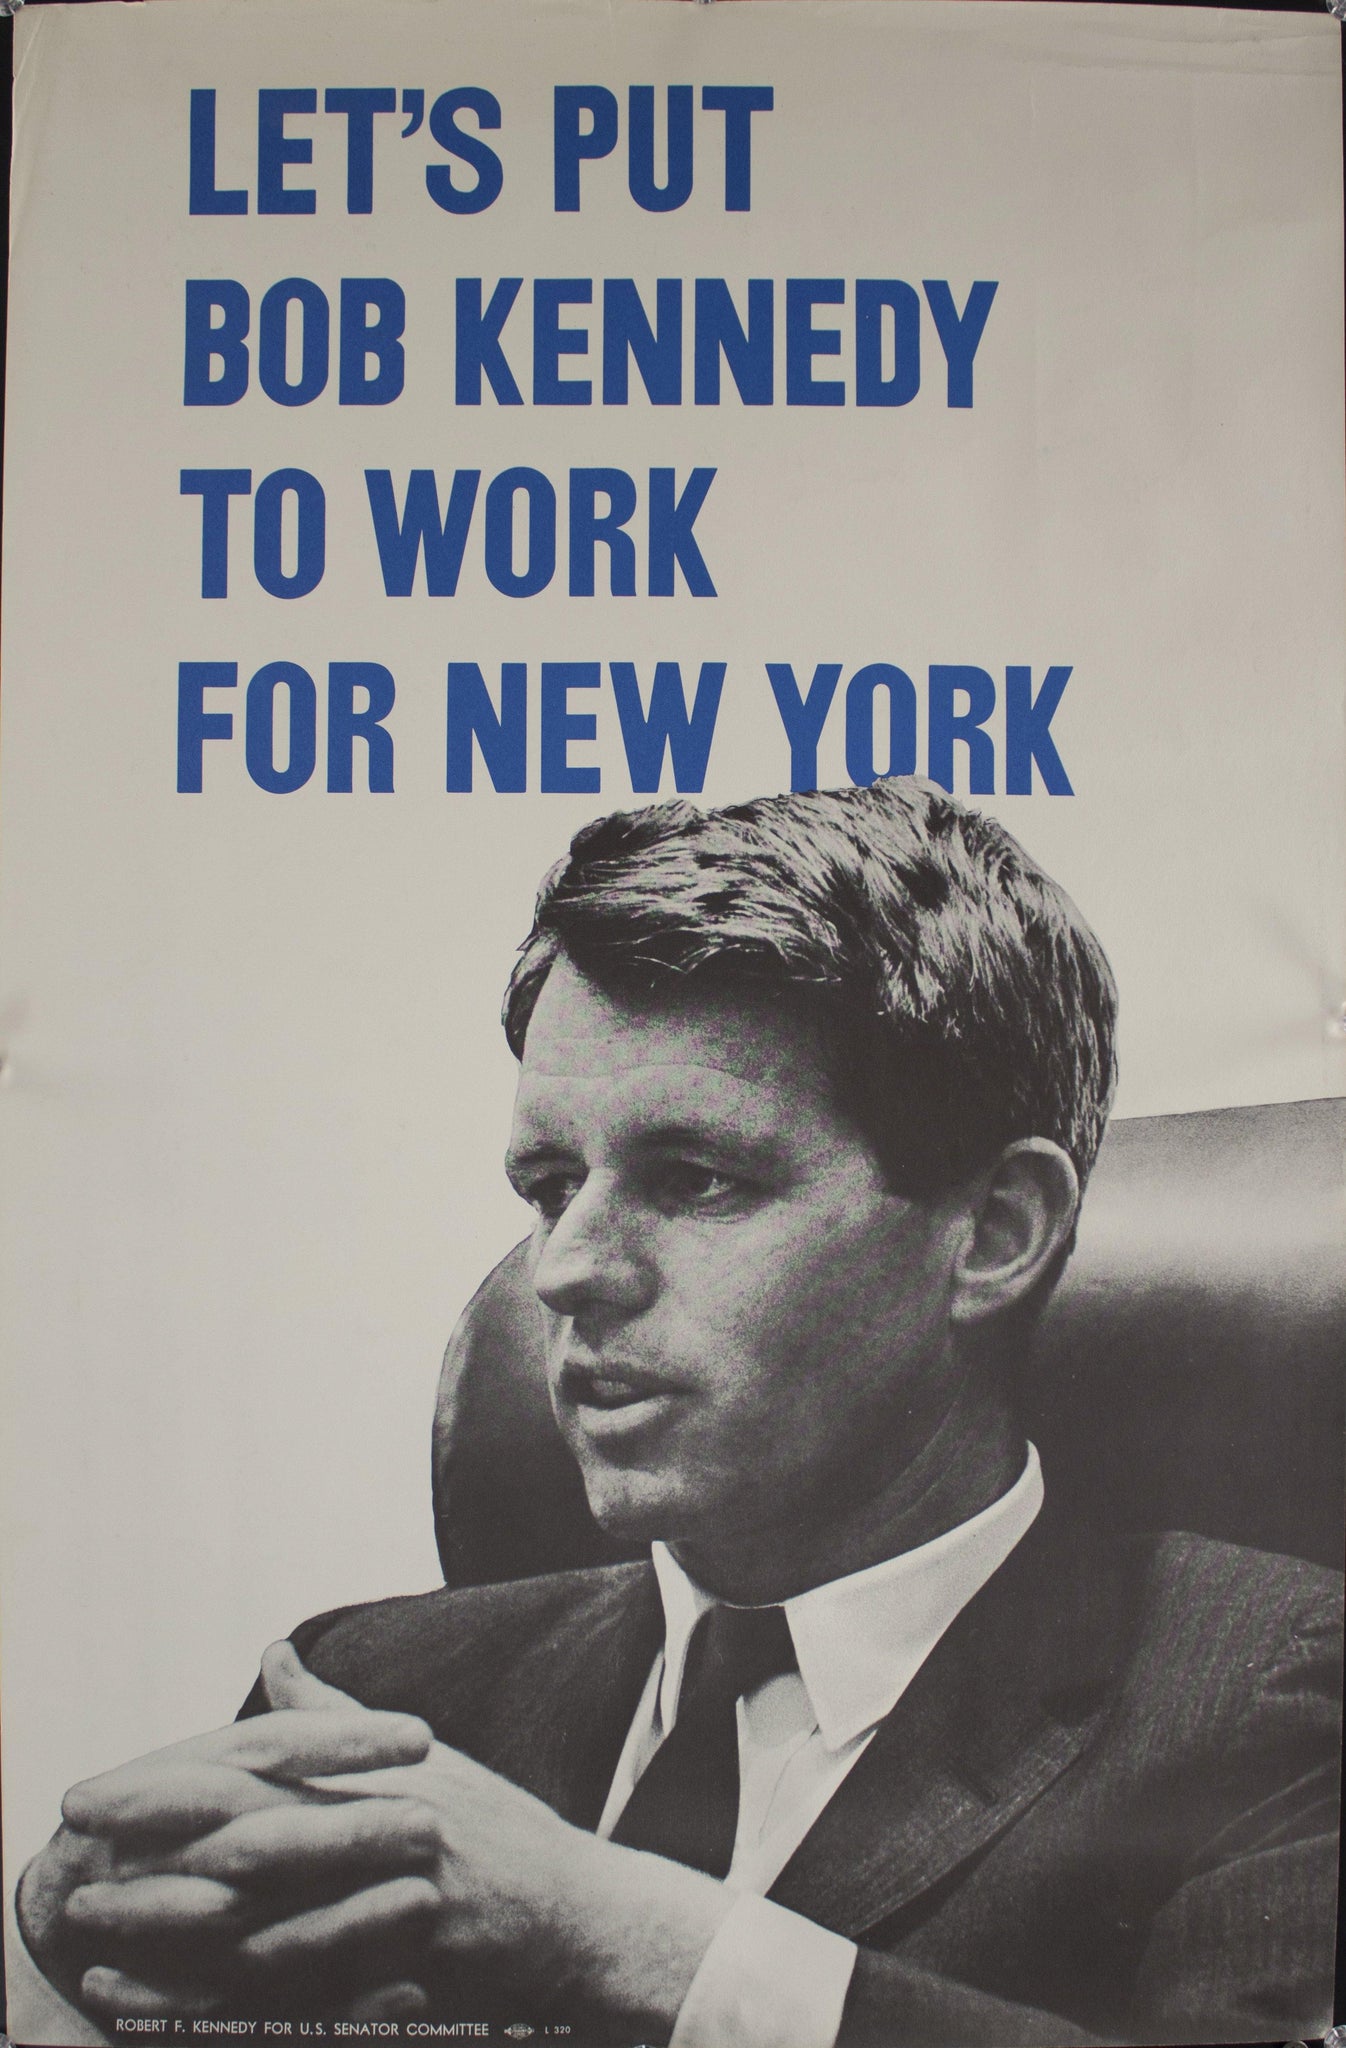 1968 Let's Put Bob Kennedy to Work for New York | Robert F. Kennedy for US Senator Committee - Golden Age Posters